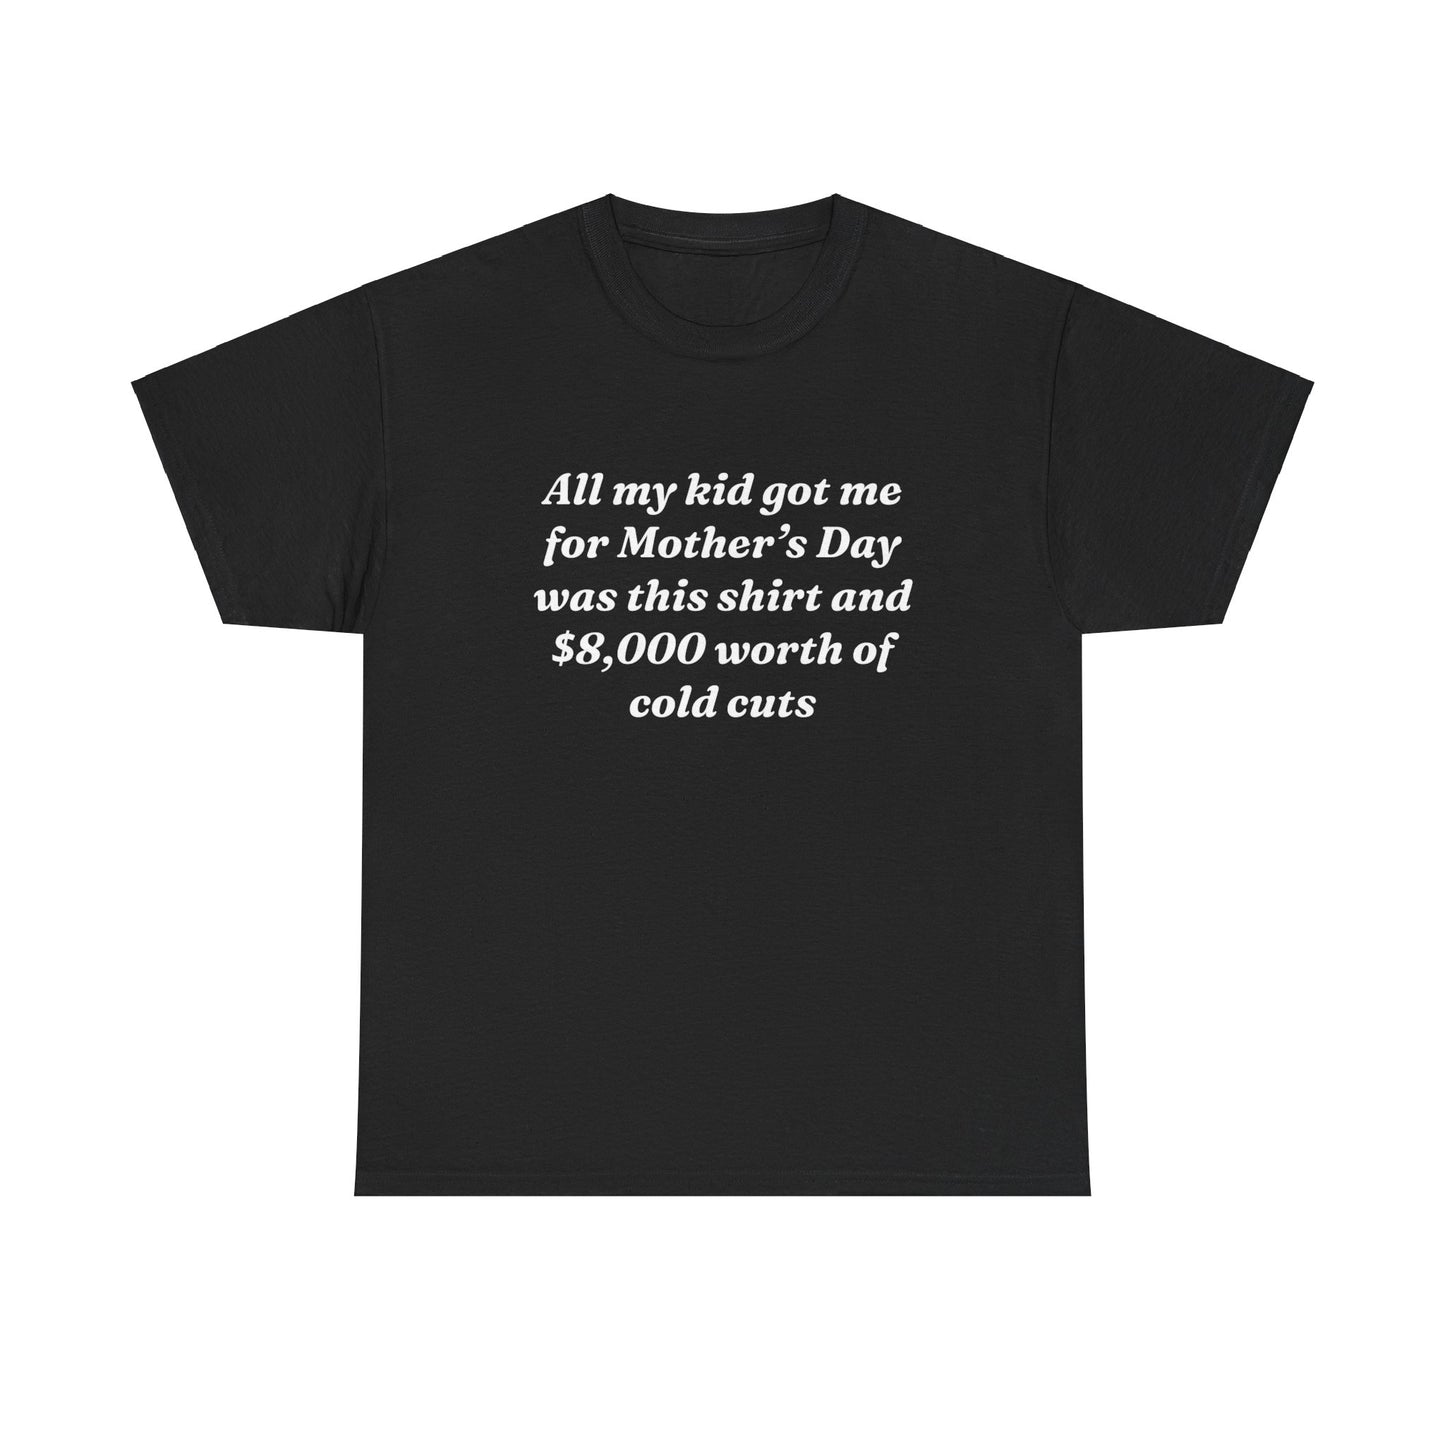 "All My Kid Got Me Was This Shirt And $8,000 Of Cold Cuts" Shirt